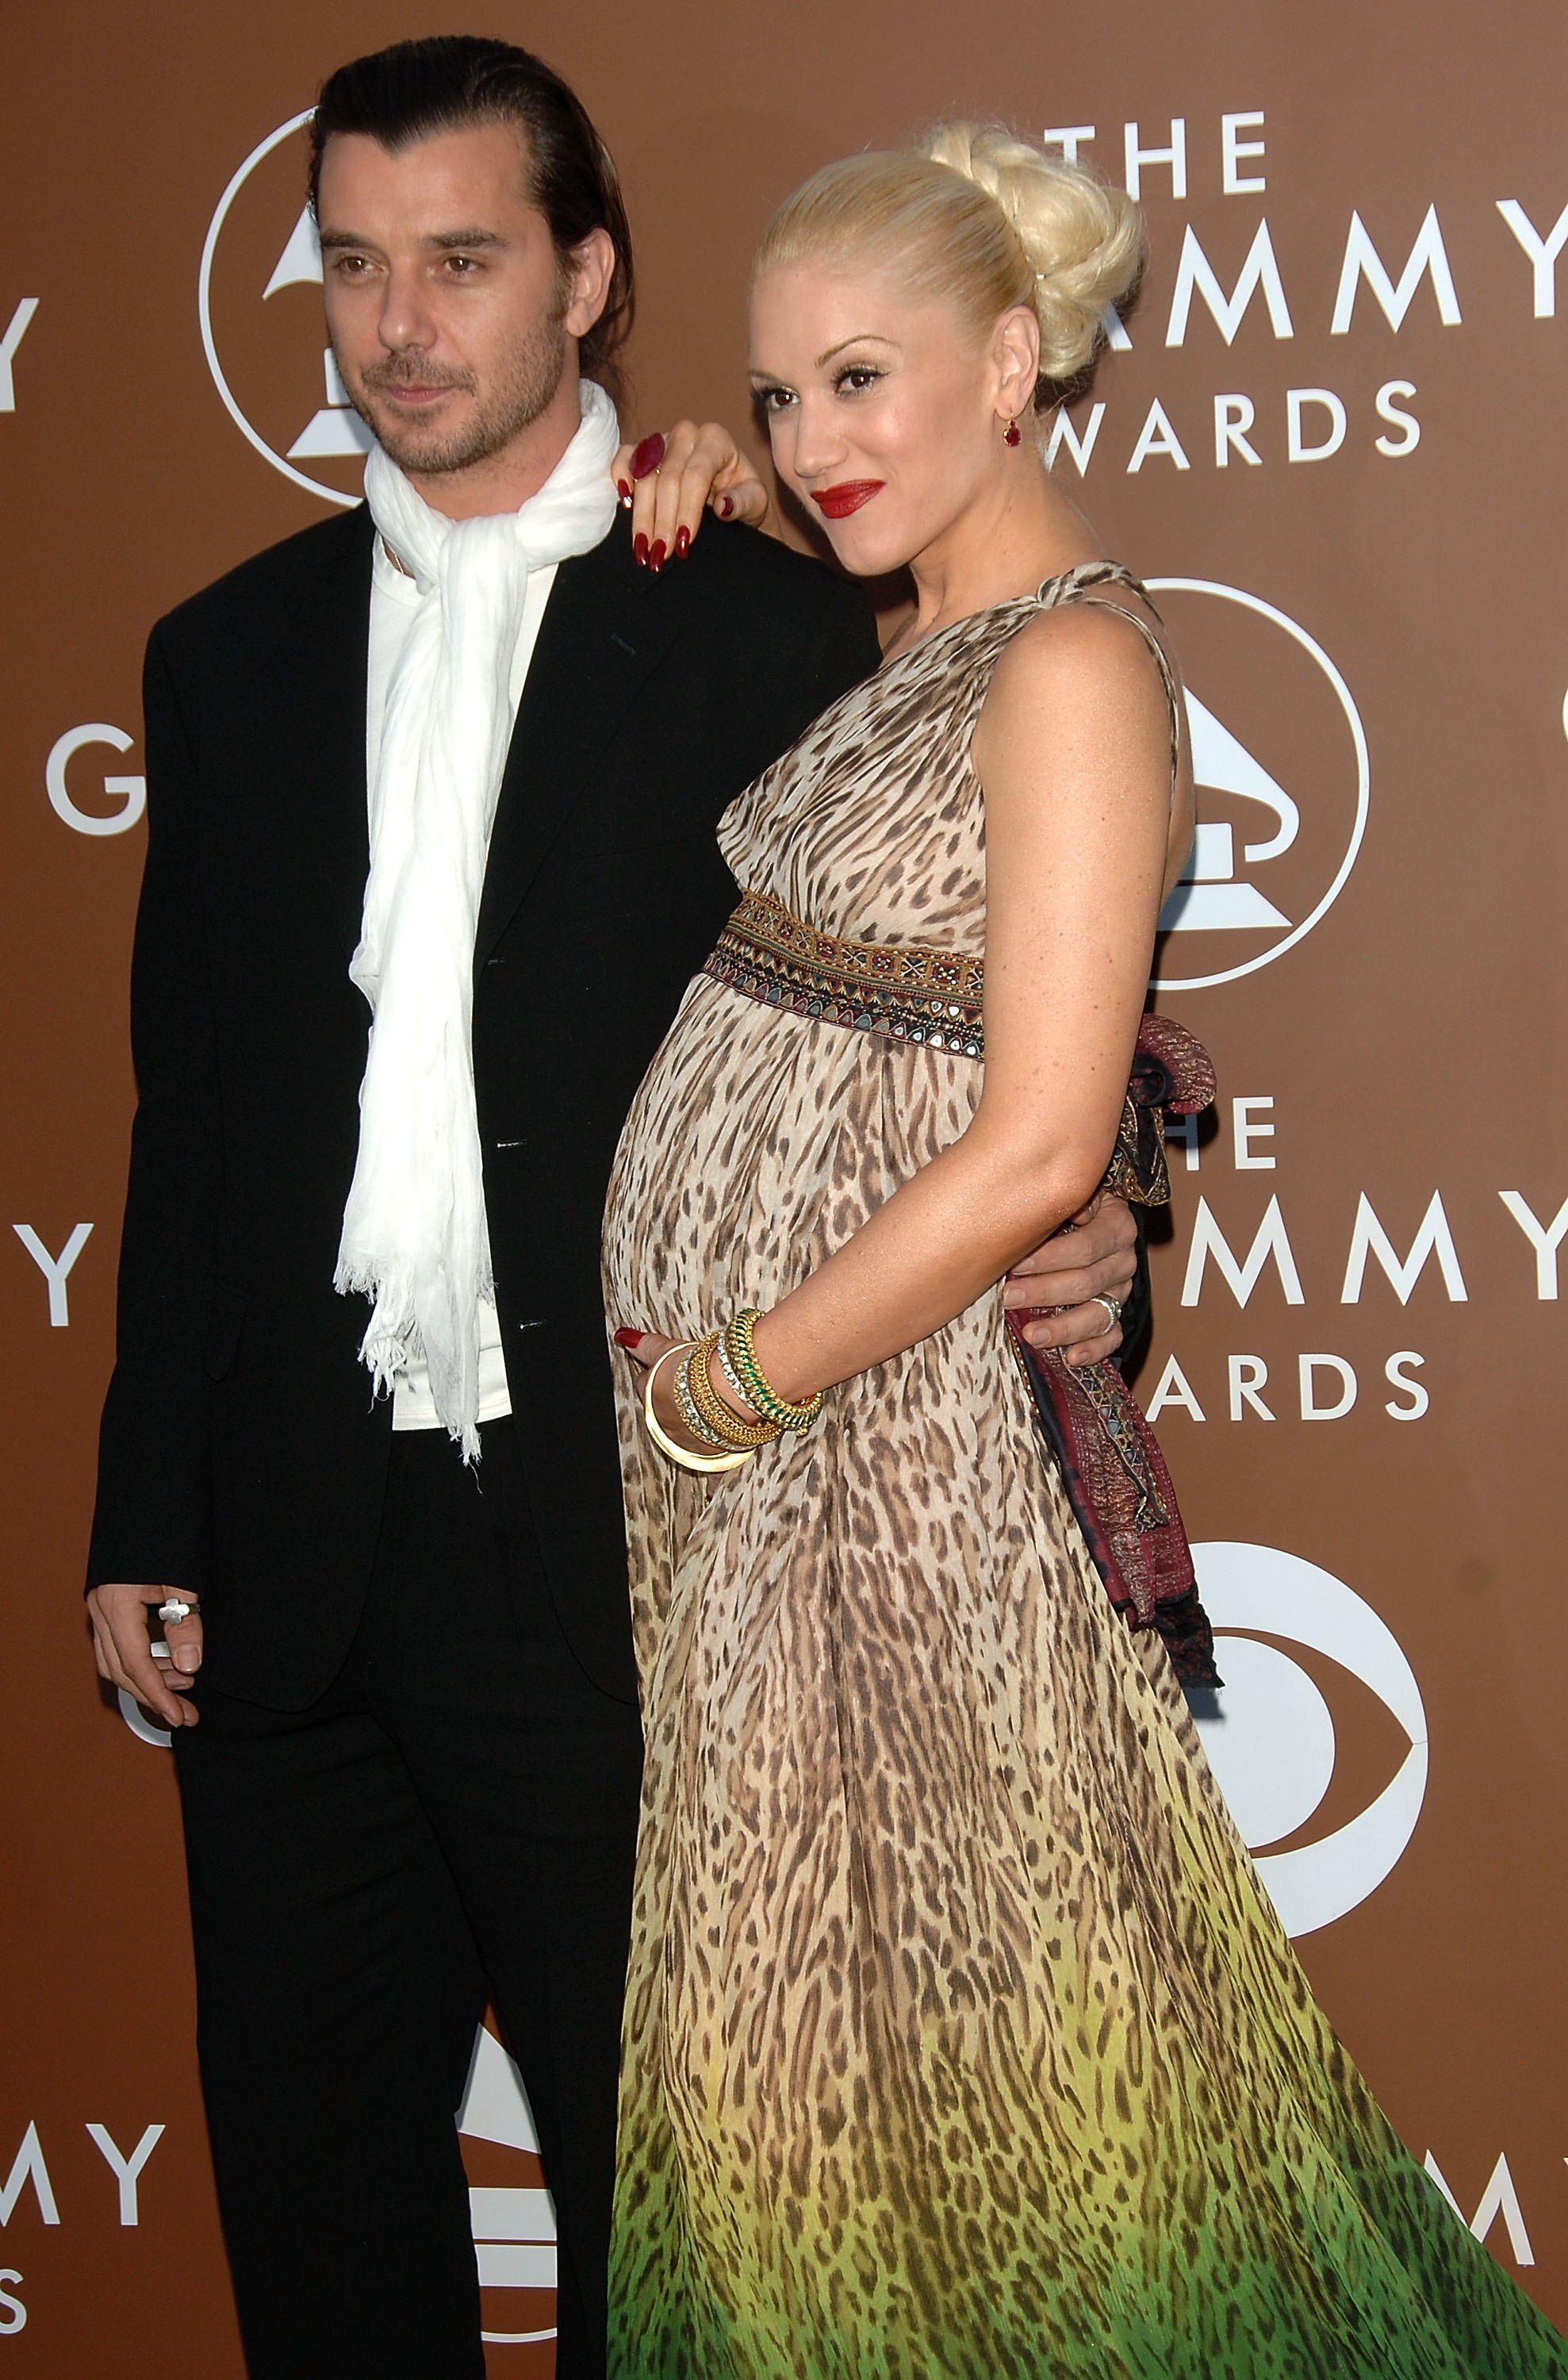  Gavin Rossdale and Gwen Stefani at the 48th Annual Grammy Awards in 2006 in Los Angeles | Source: Getty Images